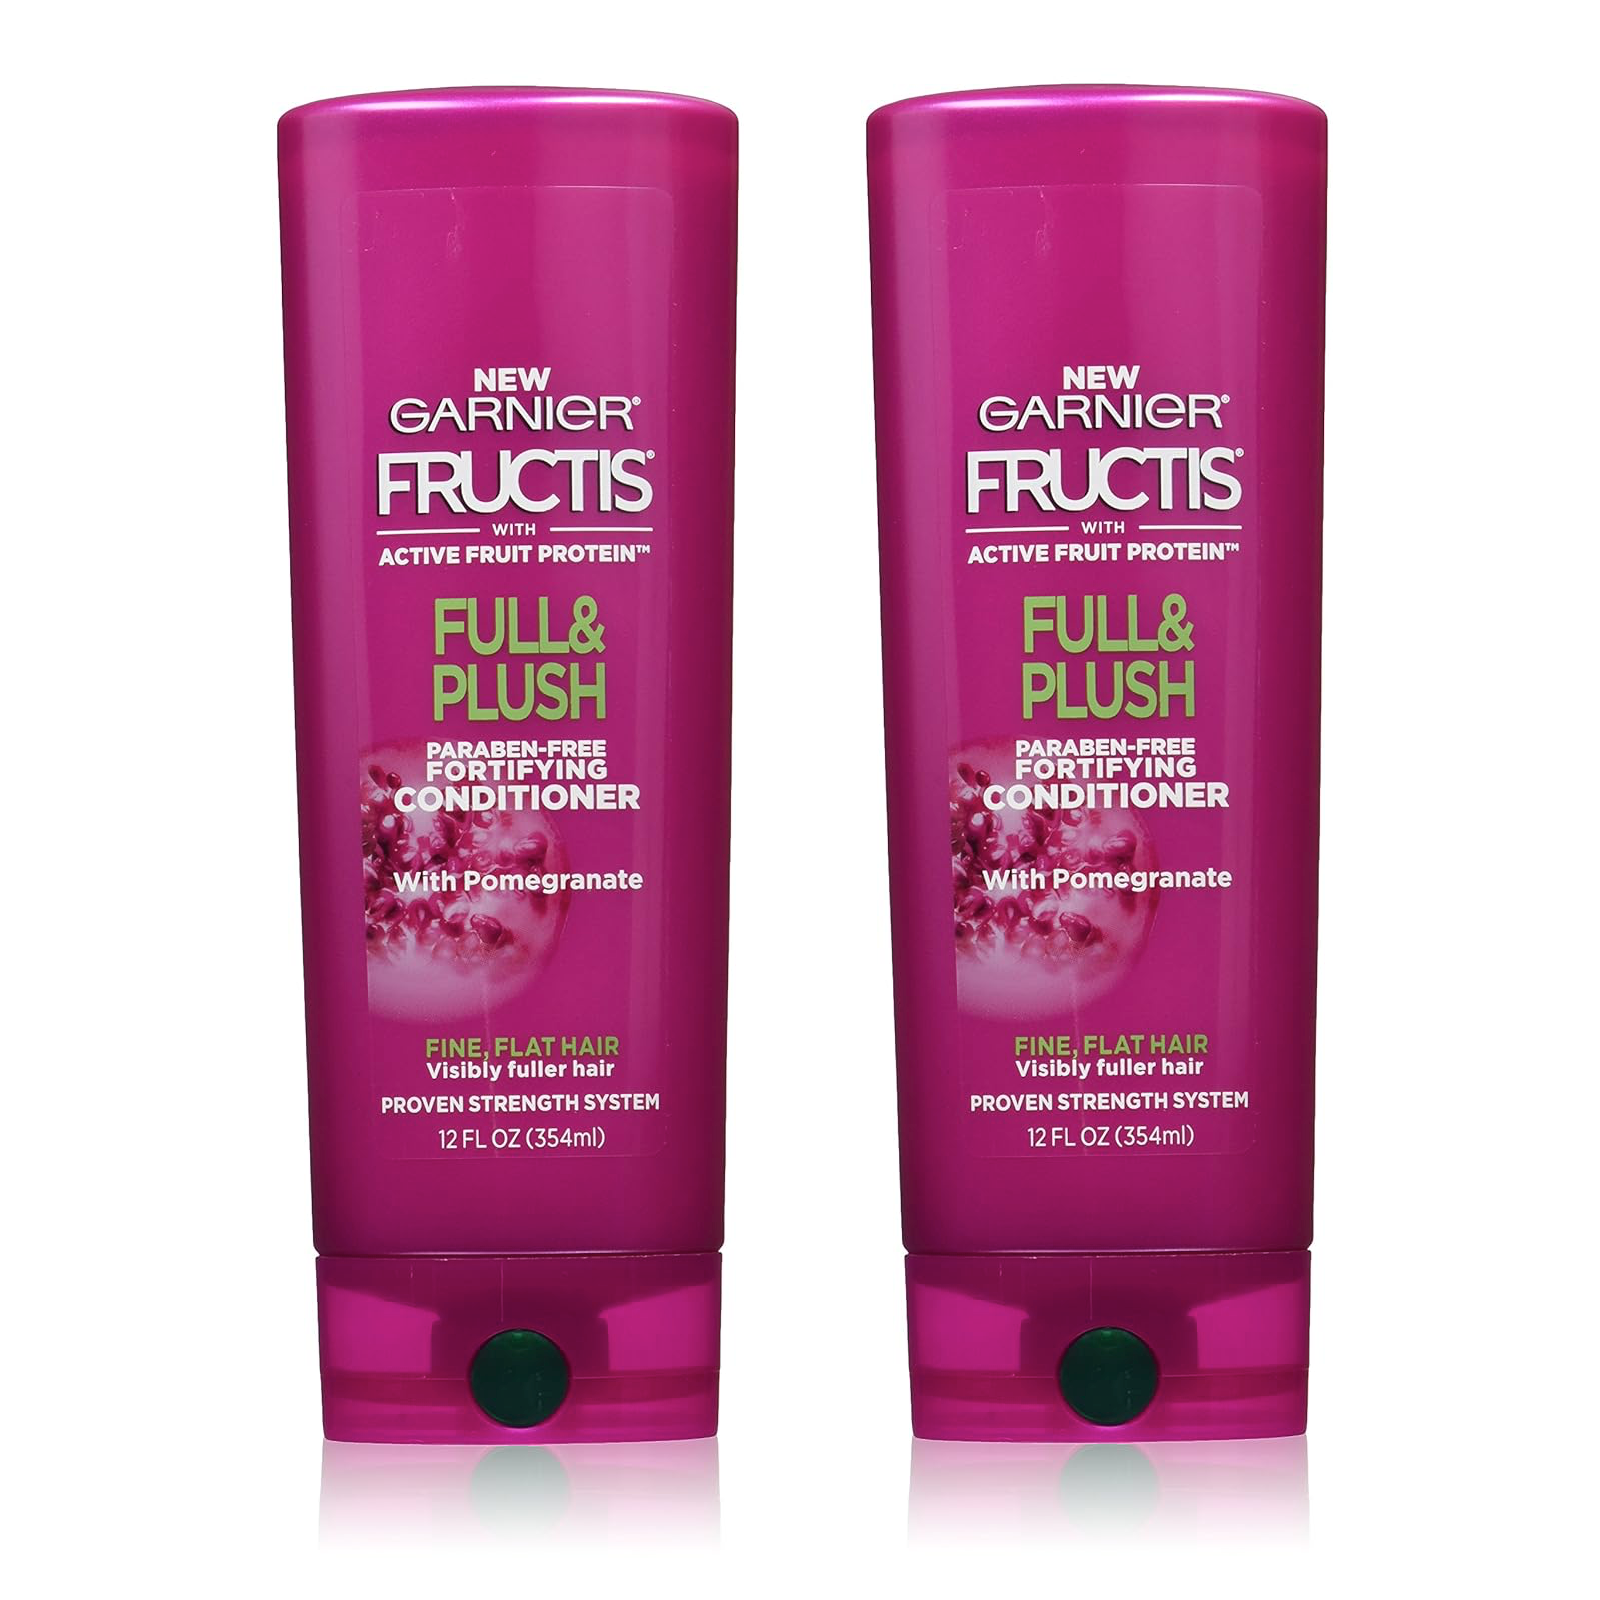 WHOLESALE GARNIER FRUCTIS FULL & PLUSH FORTIFYING CONDITIONER 12 OZ (PACK OF 2) - 48 PIECE LOT